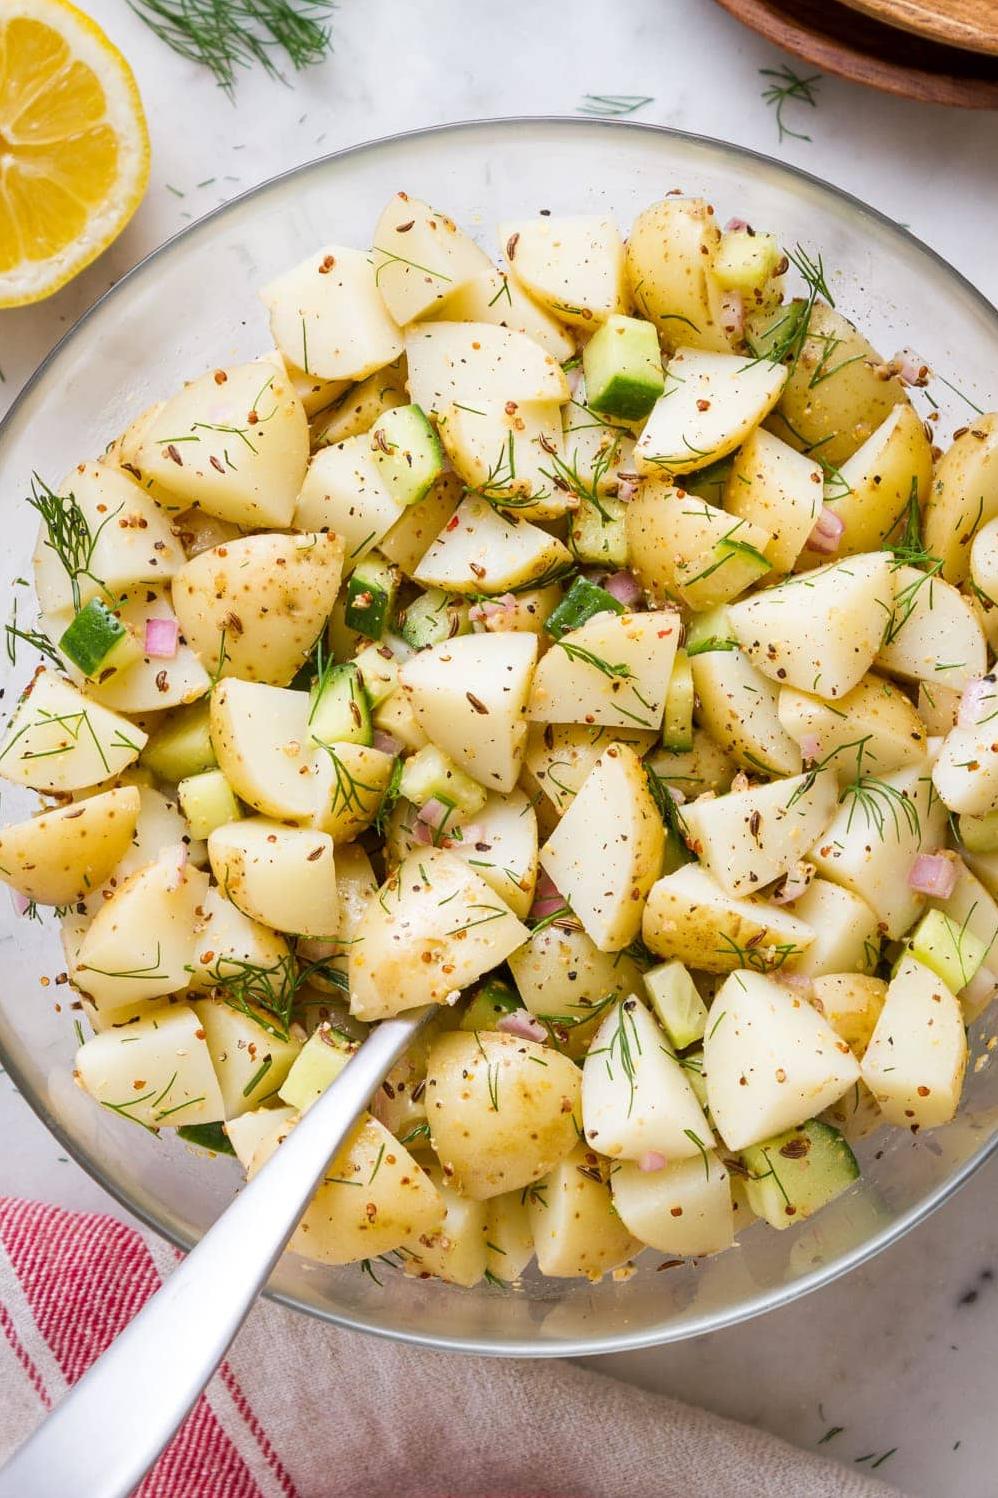  The star of the show! This tangy German potato salad is a must-try for all salad lovers.